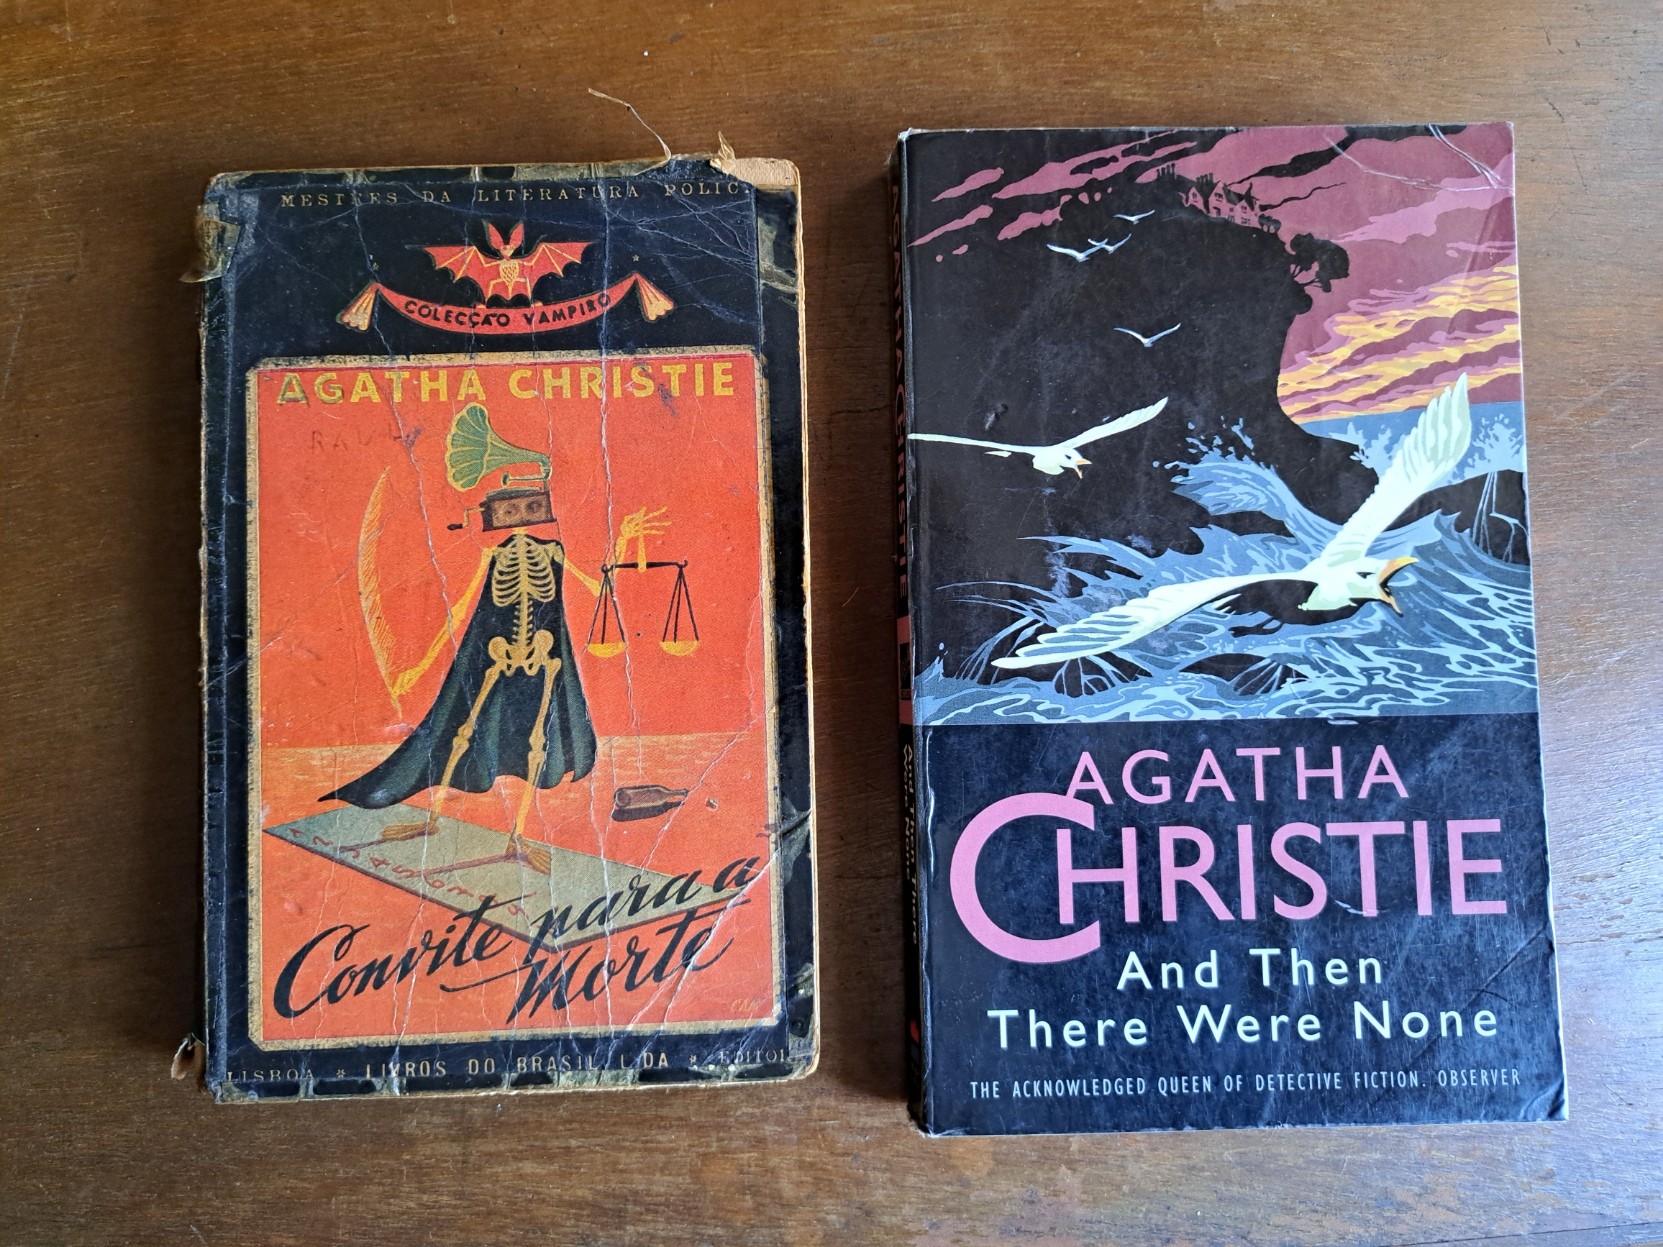 On the left, the Portuguese edition, from Colecção Vampiro. In the cover, death holds a quill ansd a balance, wears a cape and has a gramophone as its head.  On the right, an English edition. In the cover, stormy waves wash the island's cliff, with seagulls flying nearby.